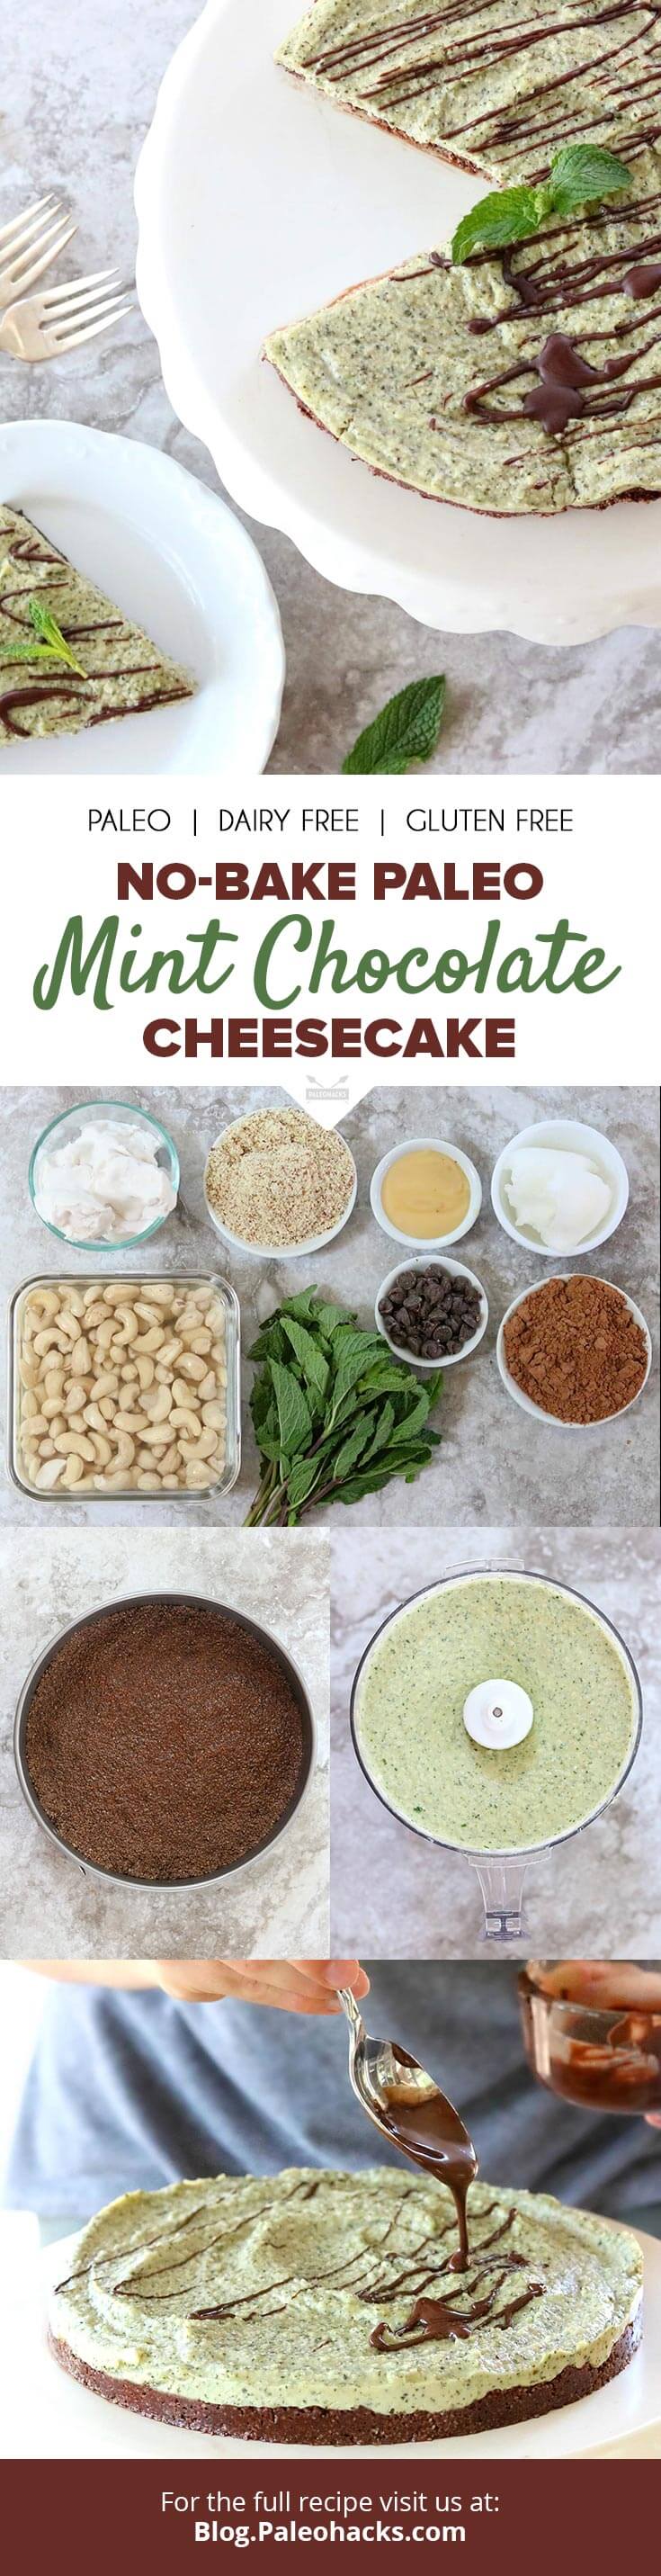 A cacao crust, real mint flavor and a drizzle of dark chocolate on top makes this creamy, no-bake mint chocolate cheesecake a dessert favorite. 